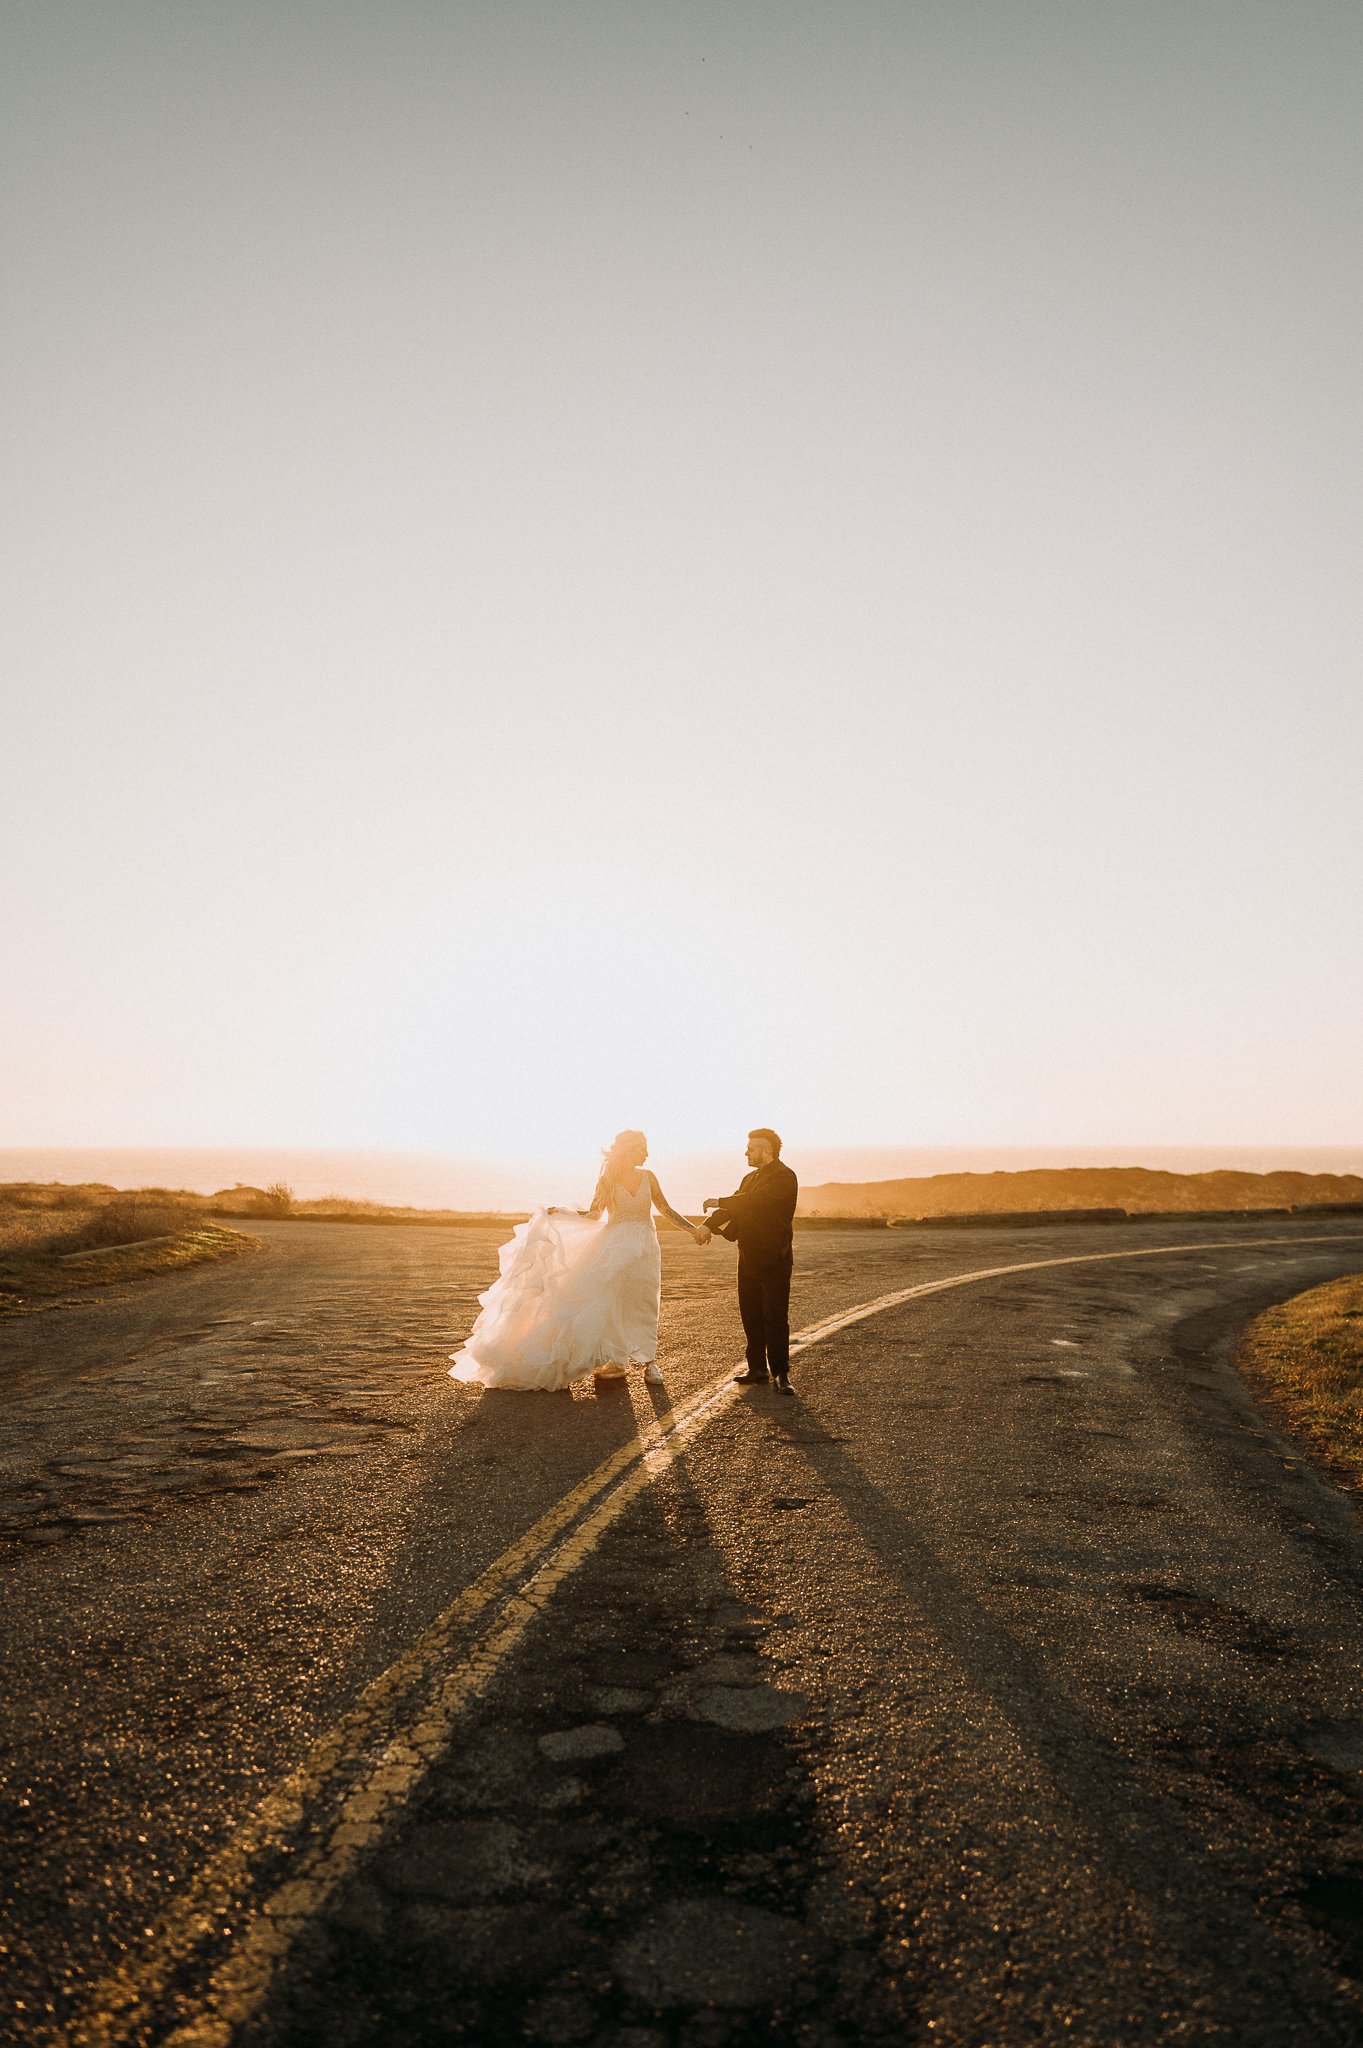 bride and groom in wedding attire on a road with yellow divider lines in center looking into each other eyes and holding hands on wedding day in Mendocino, California